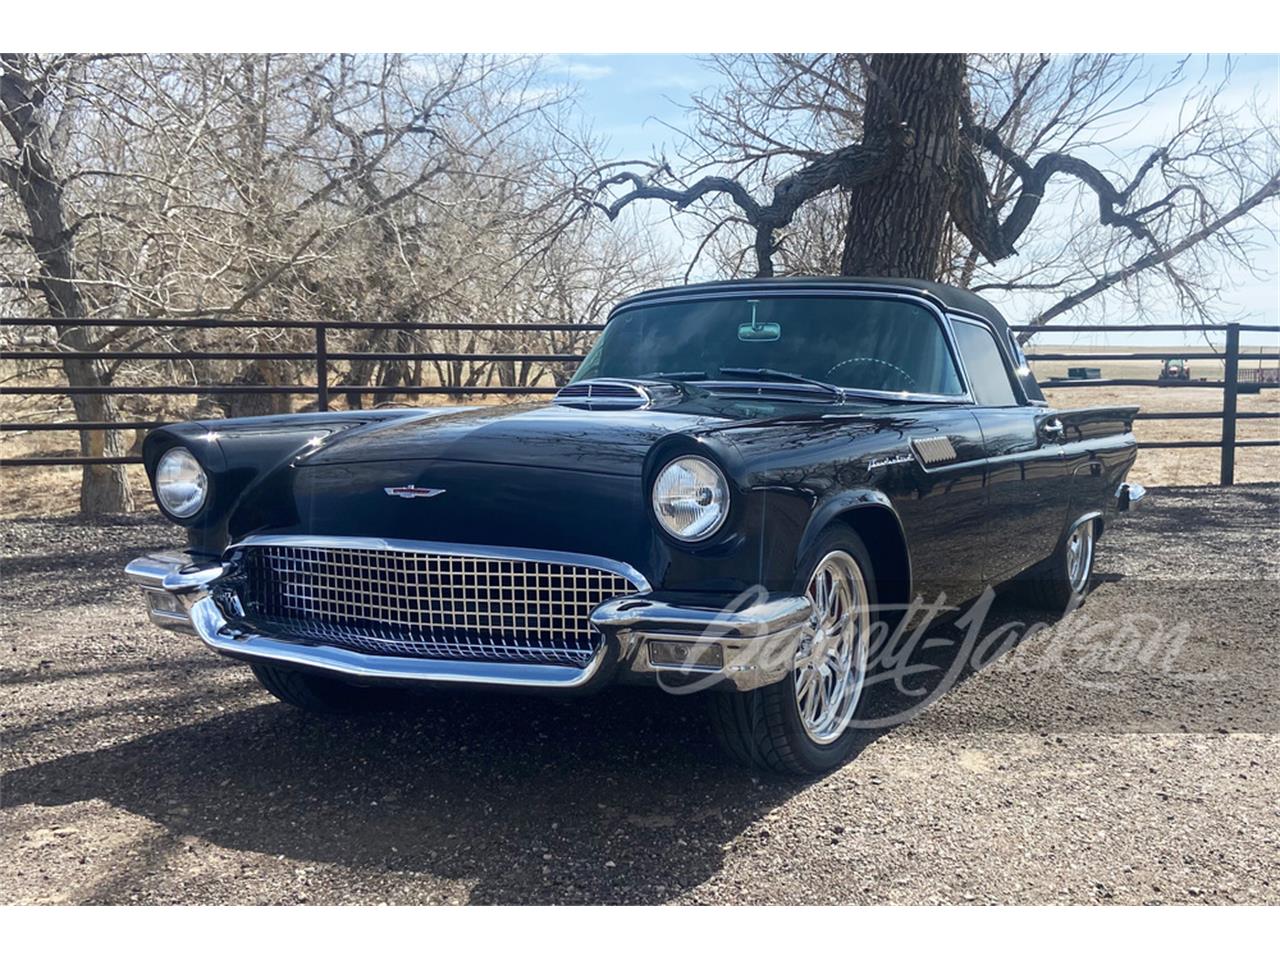 For Sale at Auction: 1957 Ford Thunderbird in Scottsdale, Arizona for sale in Scottsdale, AZ